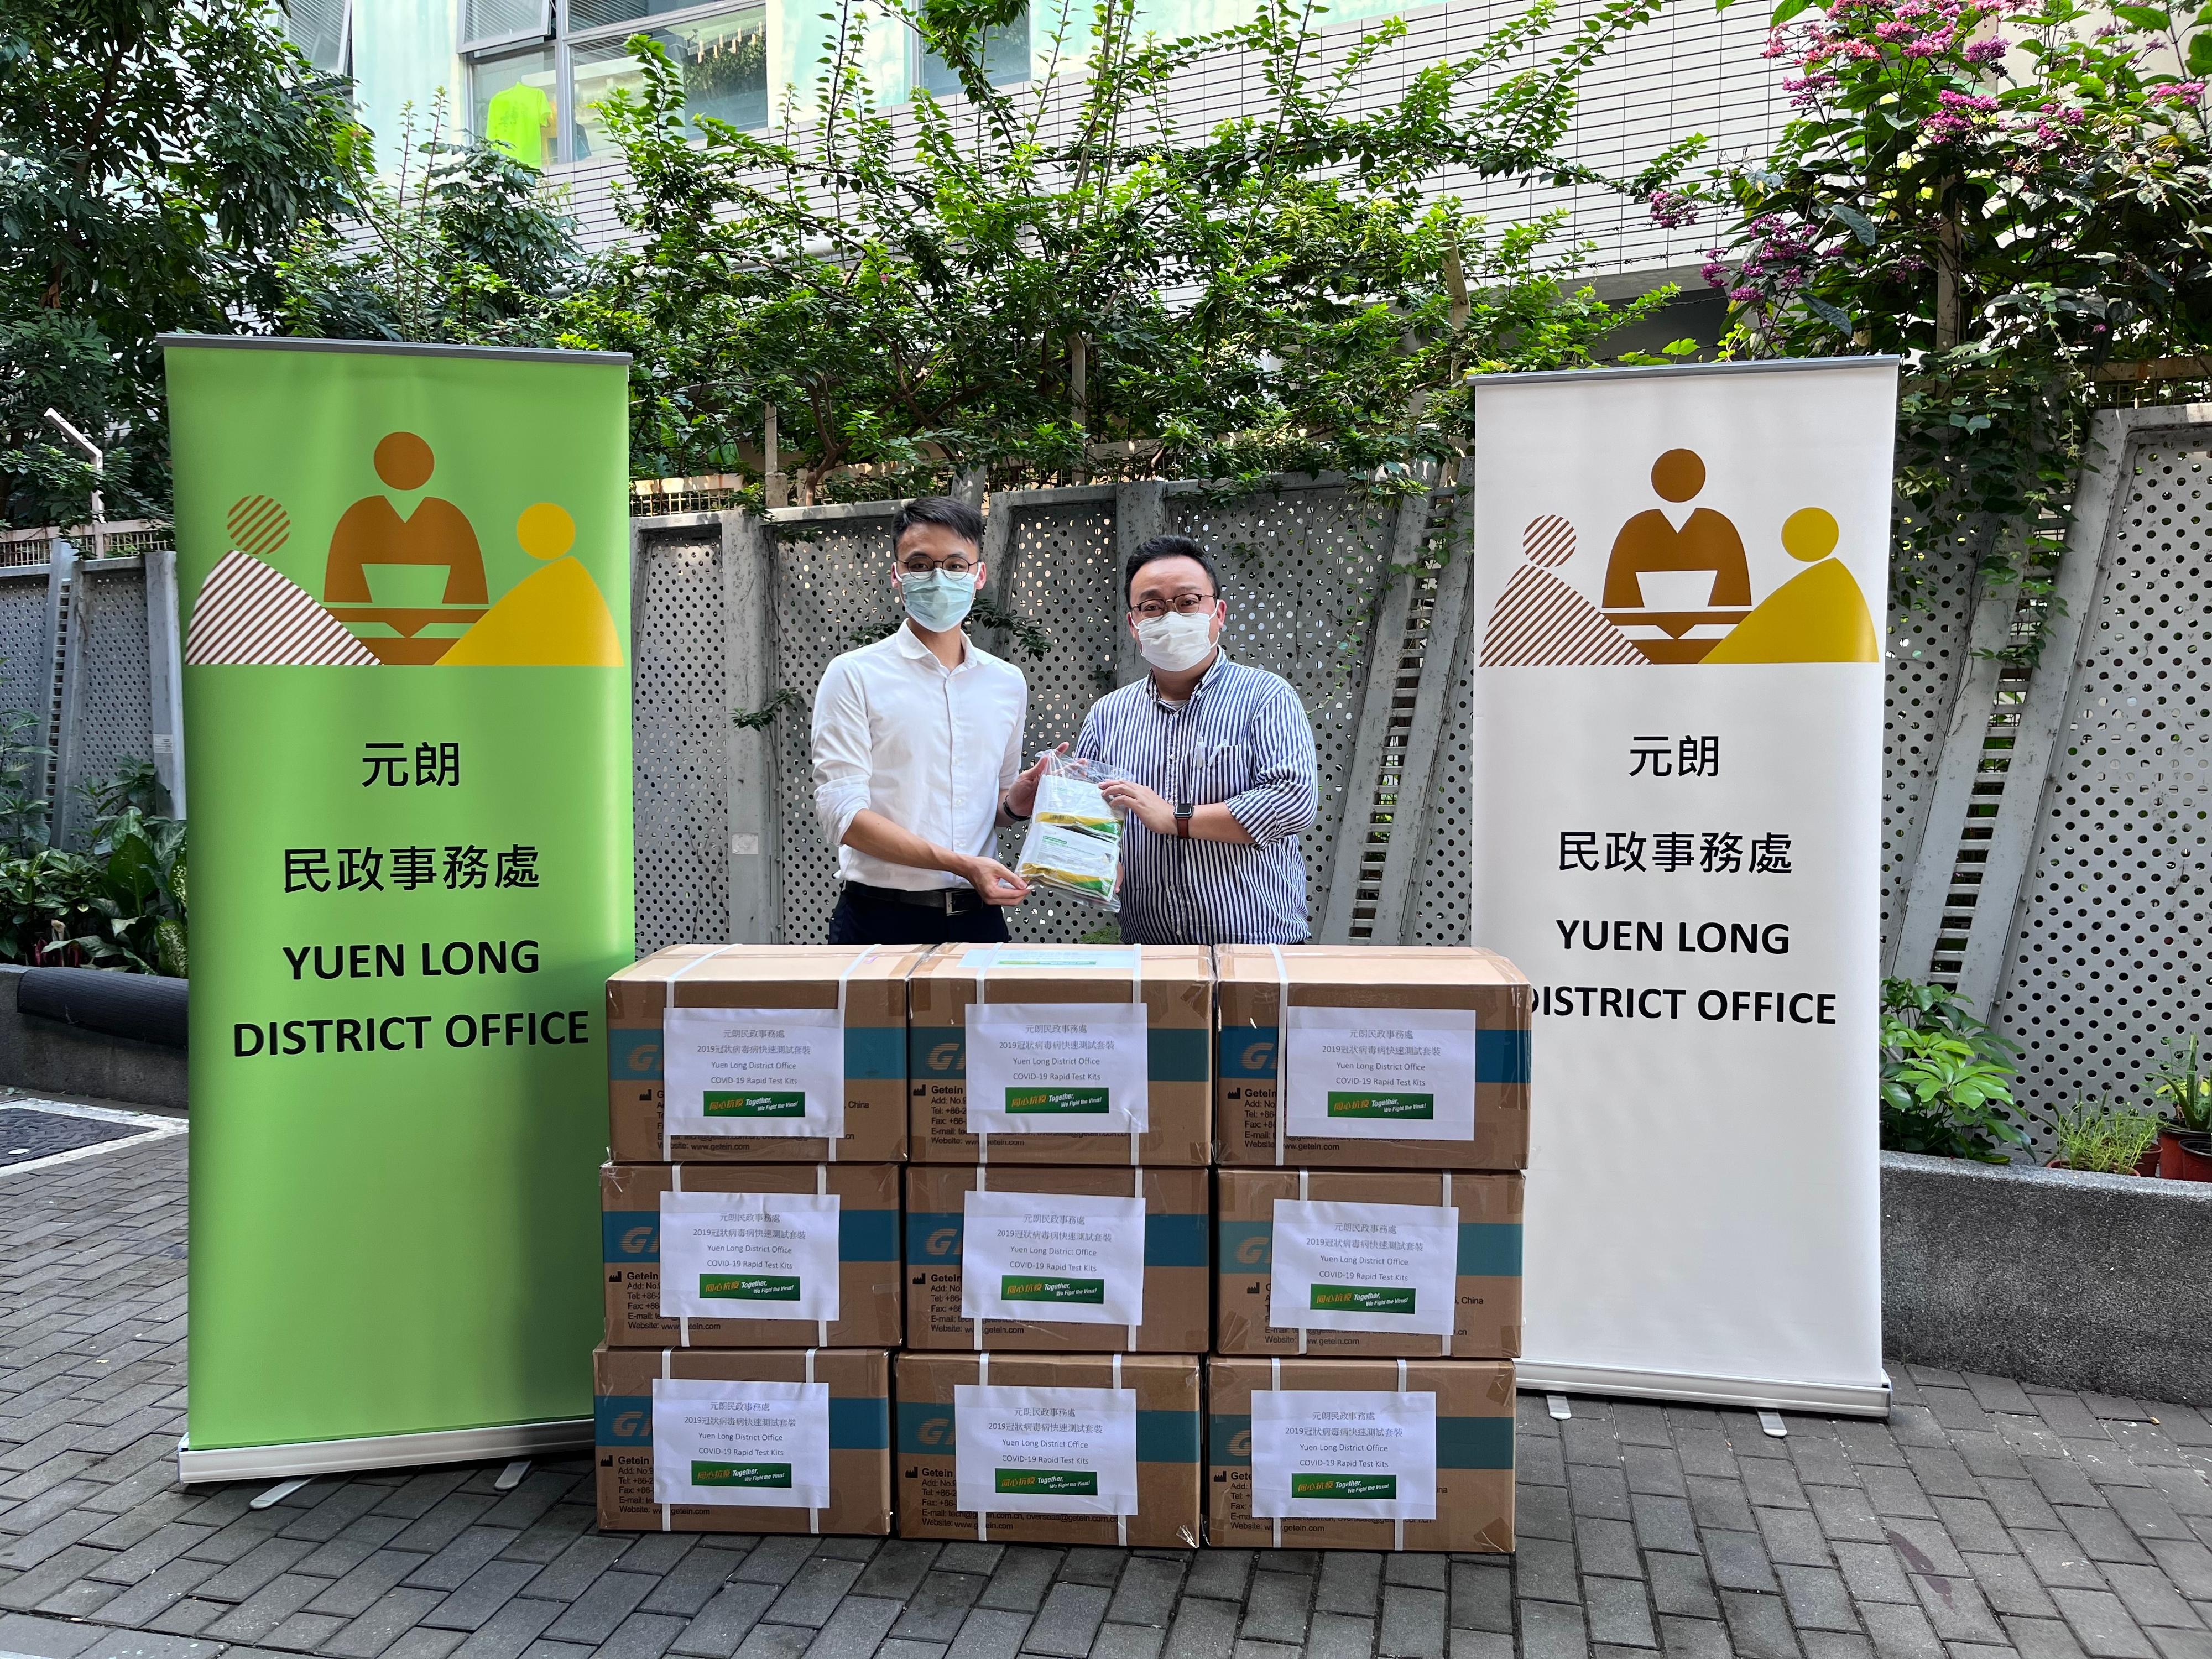 The Yuen Long District Office today (June 29) distributed COVID-19 rapid test kits to households, cleansing workers and property management staff living and working in Sereno Verde for voluntary testing through the property management company.